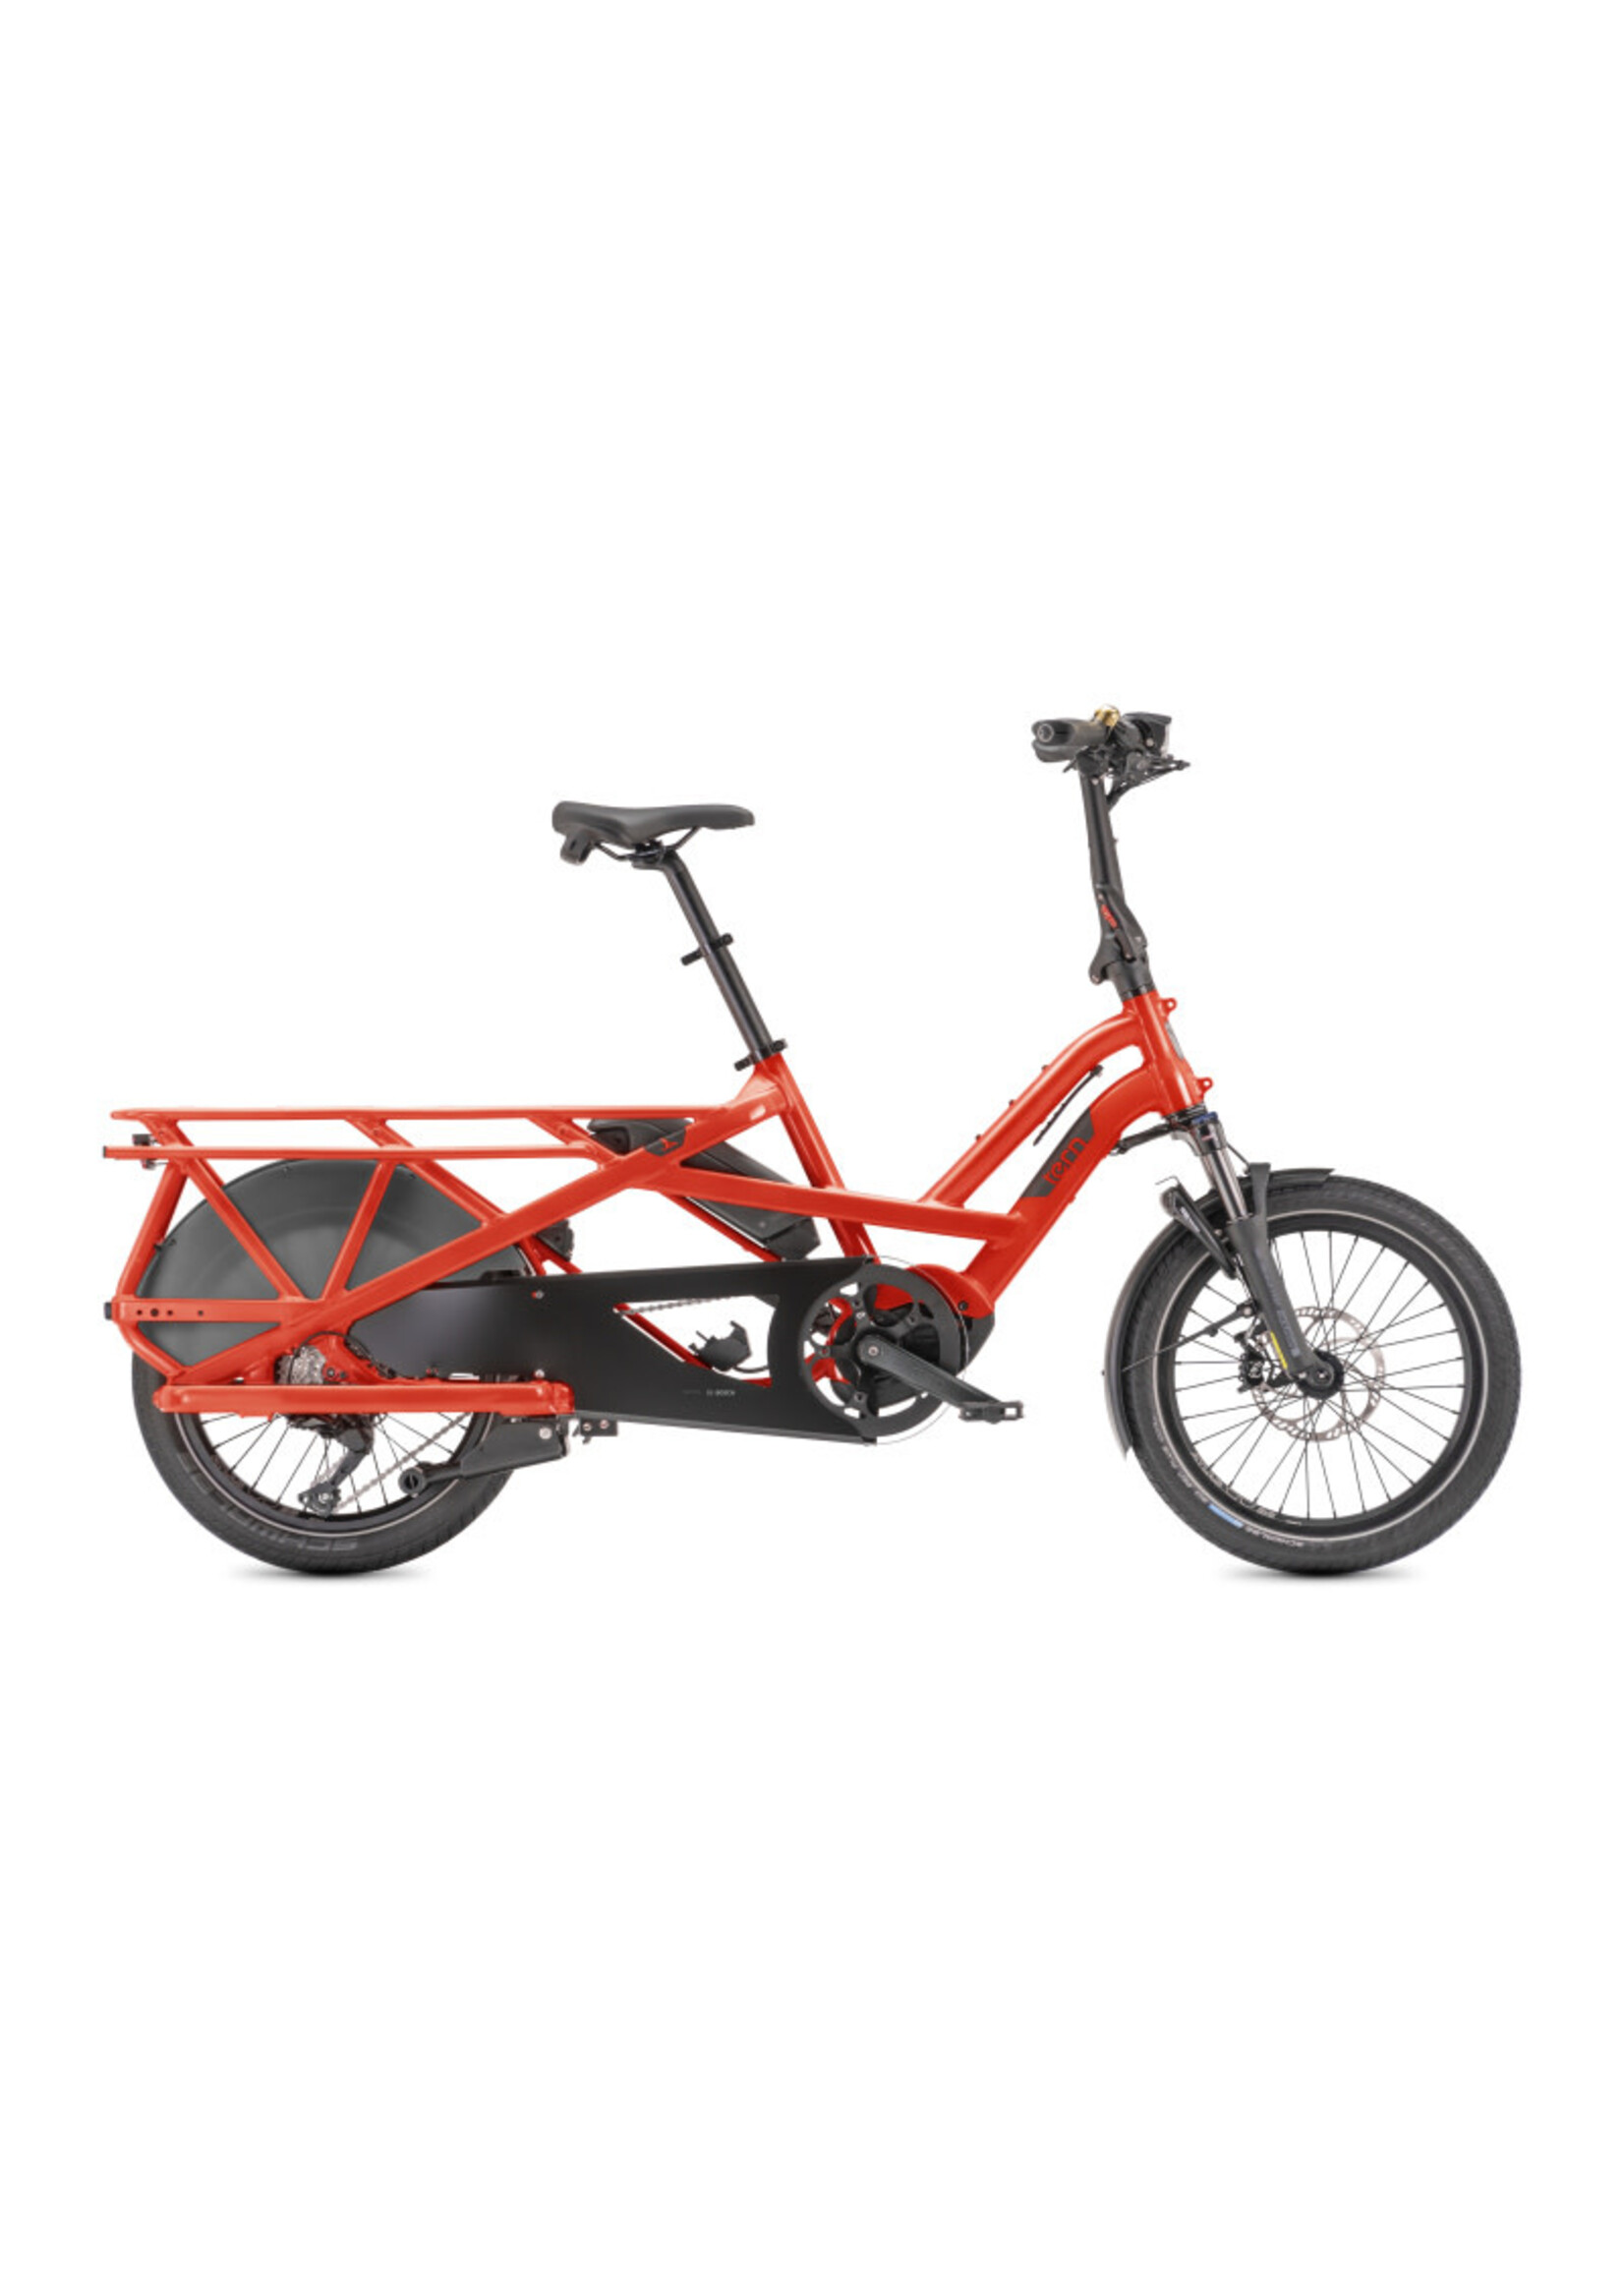 Tern GSD S10 Cargo line - 500 wh - shimano - Rouge tabasco 1x10